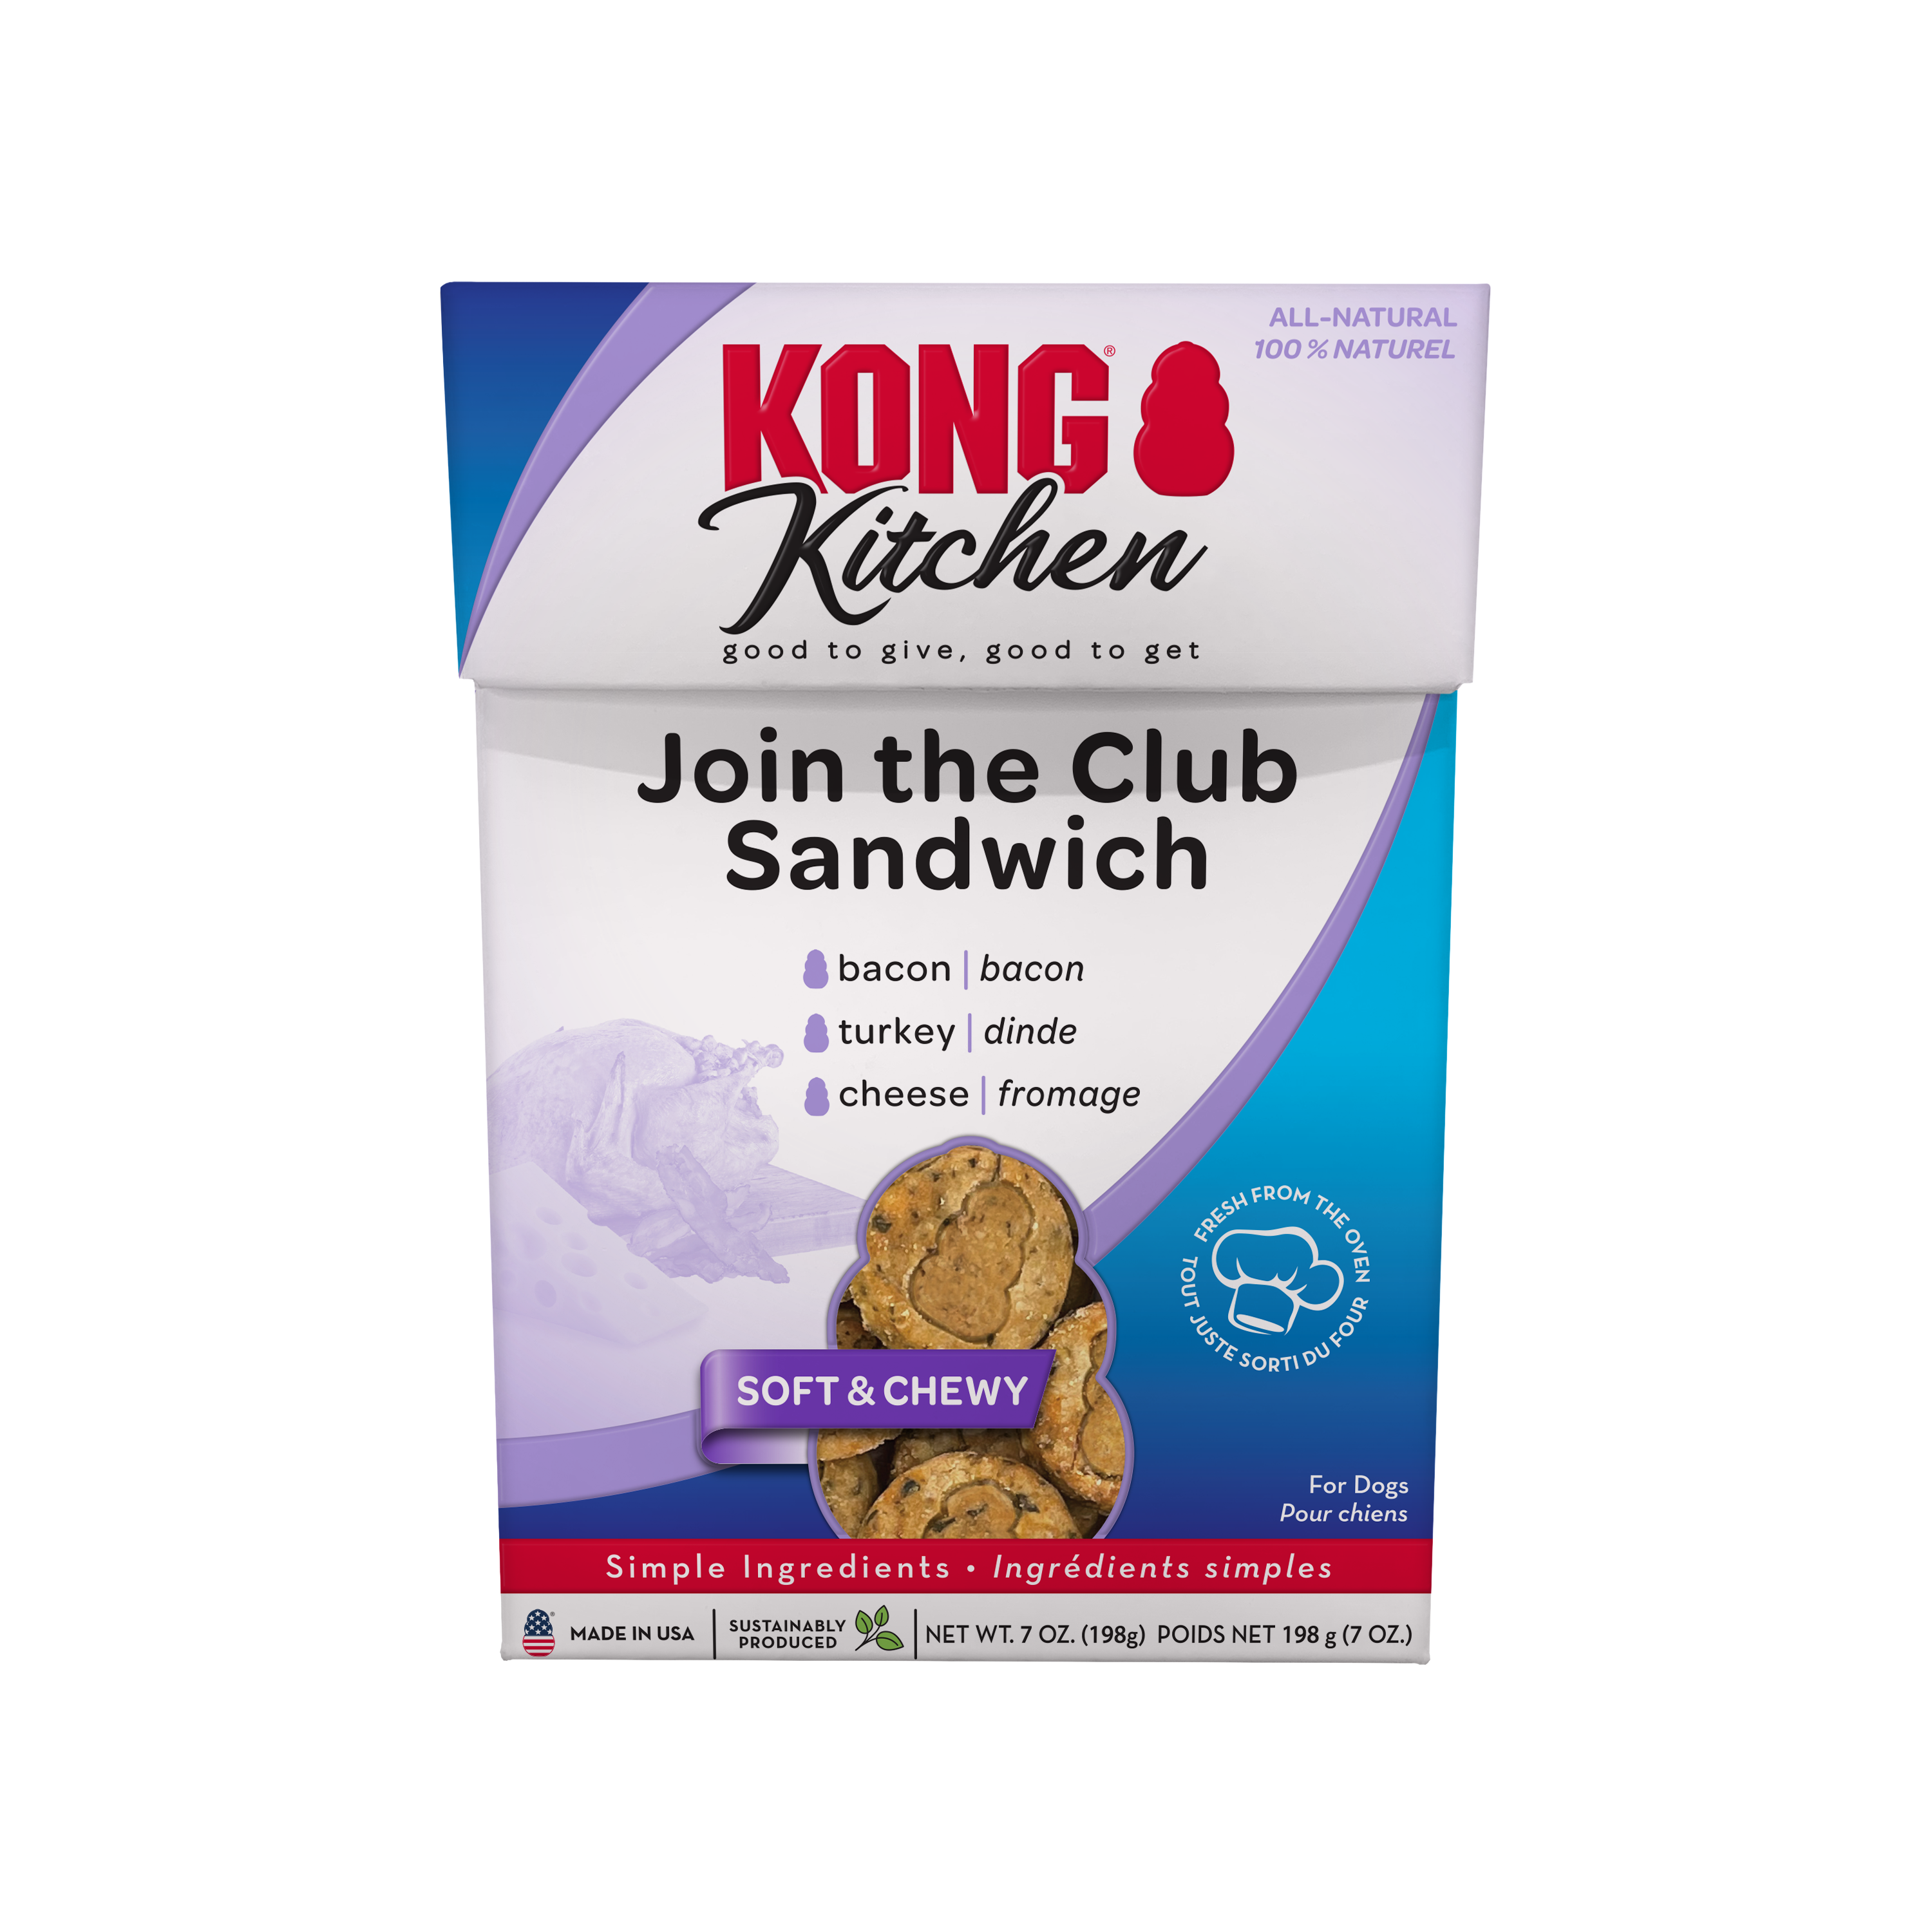 KONG Kitchen Soft & Chewy Join The Club Sandwitch onpack product image